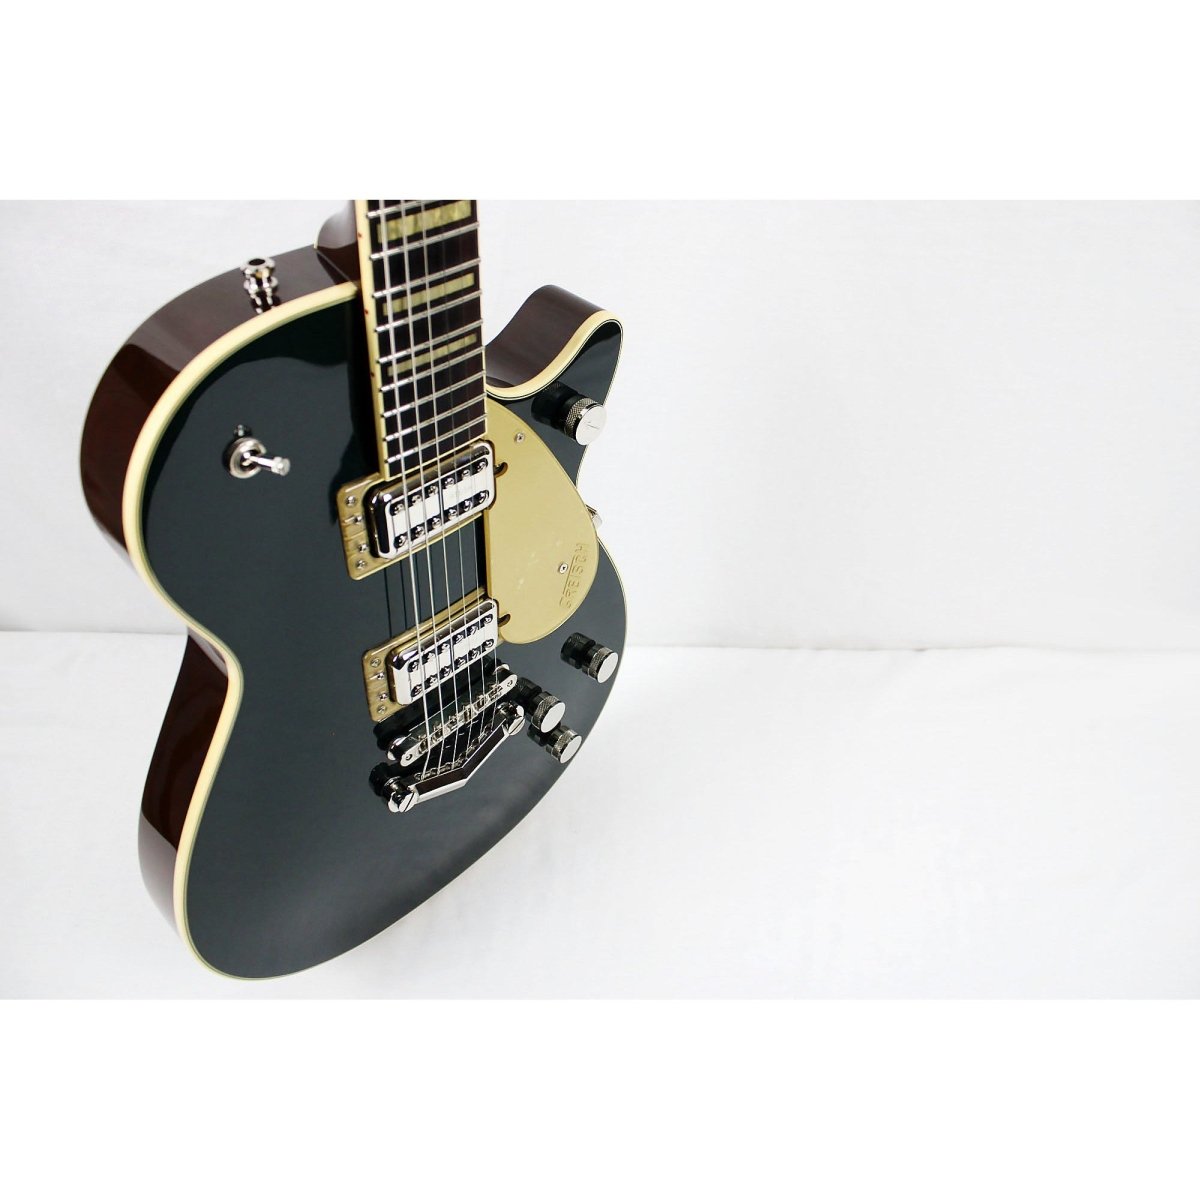 2018 Gretsch G6228 Players Edition Jet BT with V-Stoptail - Cadillac Green **USED - EXCELLENT** - Leitz Music--JT18093830